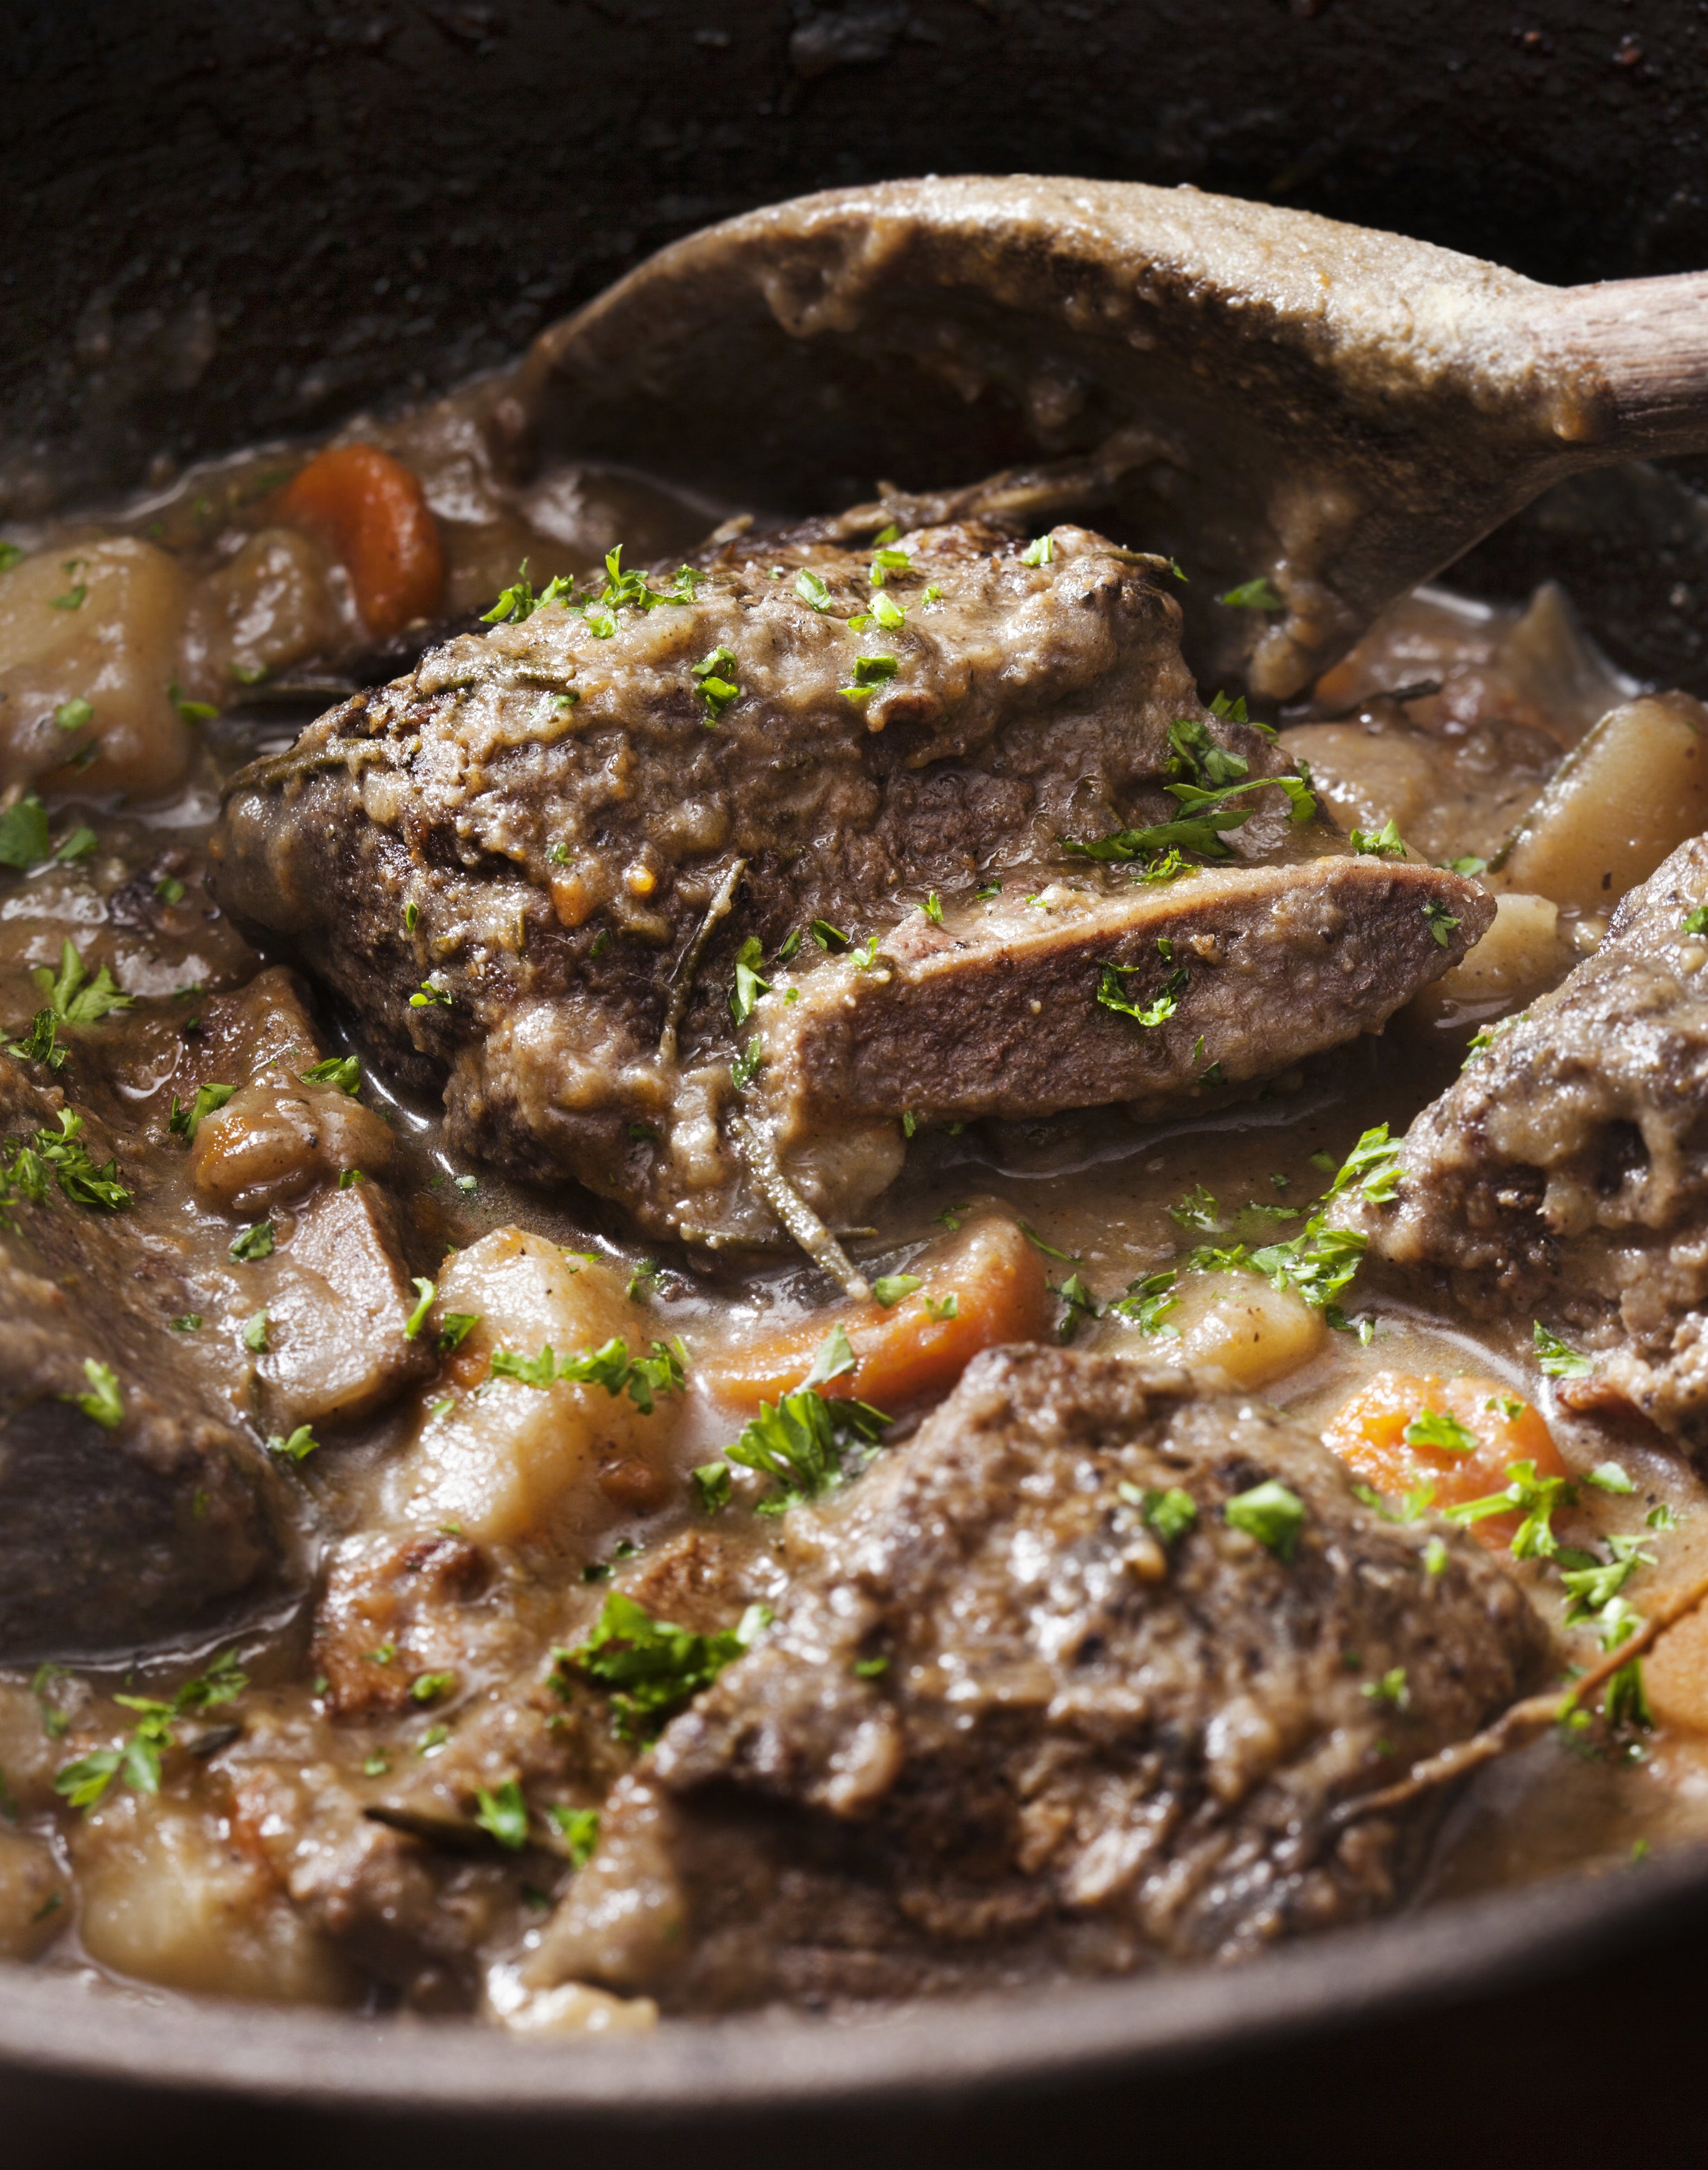 short ribs cooking in a gravy with vegetables, parsley sprinkled on top